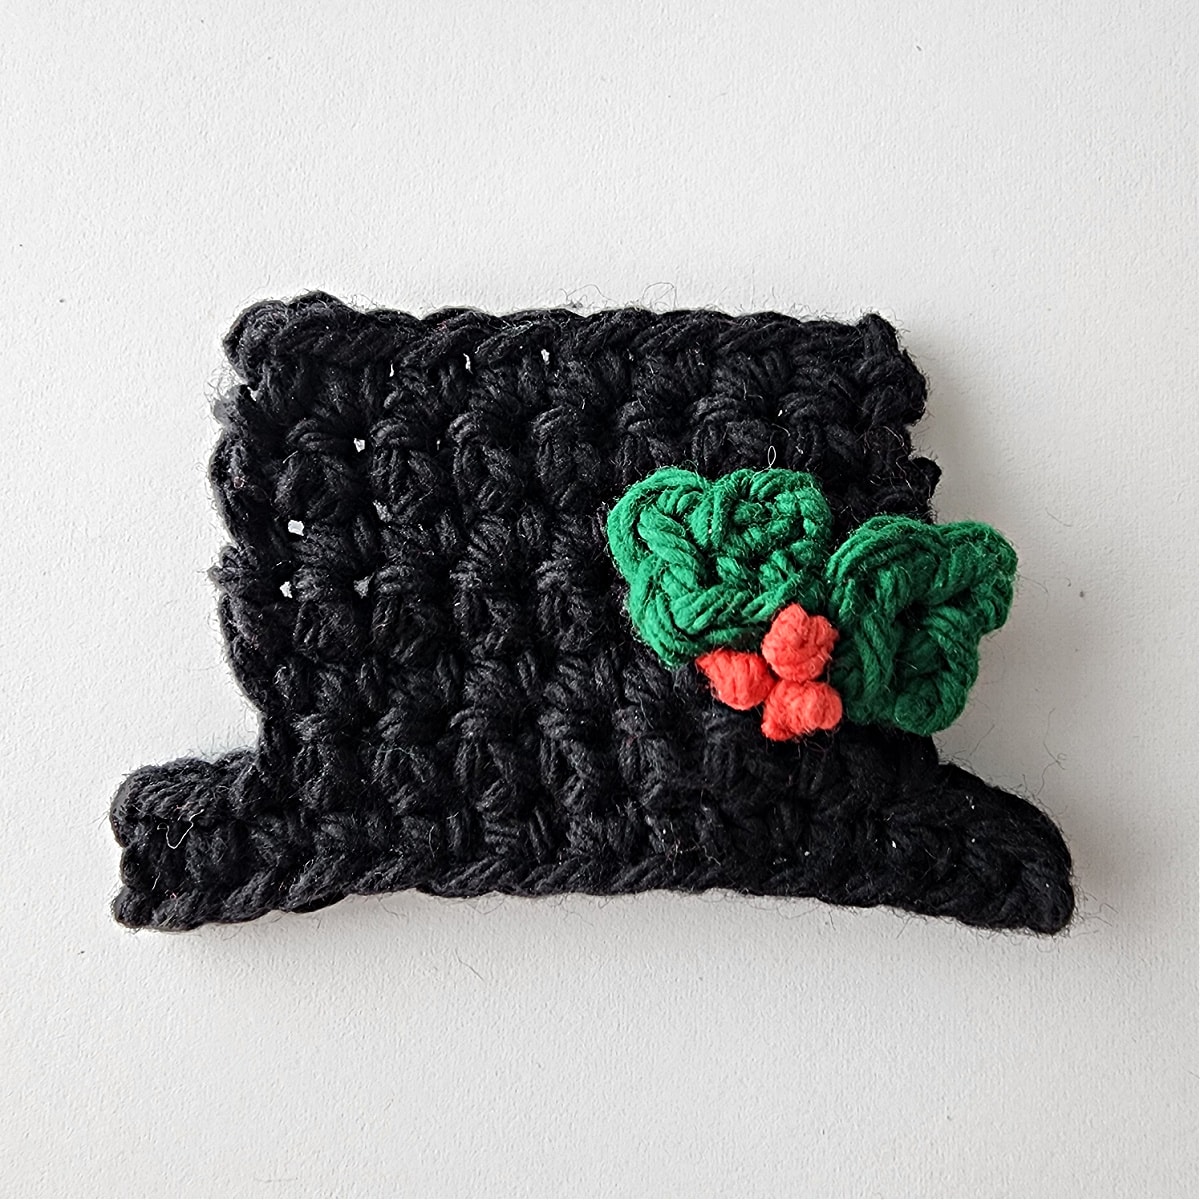 crochet snowman black hat with leaves and berries